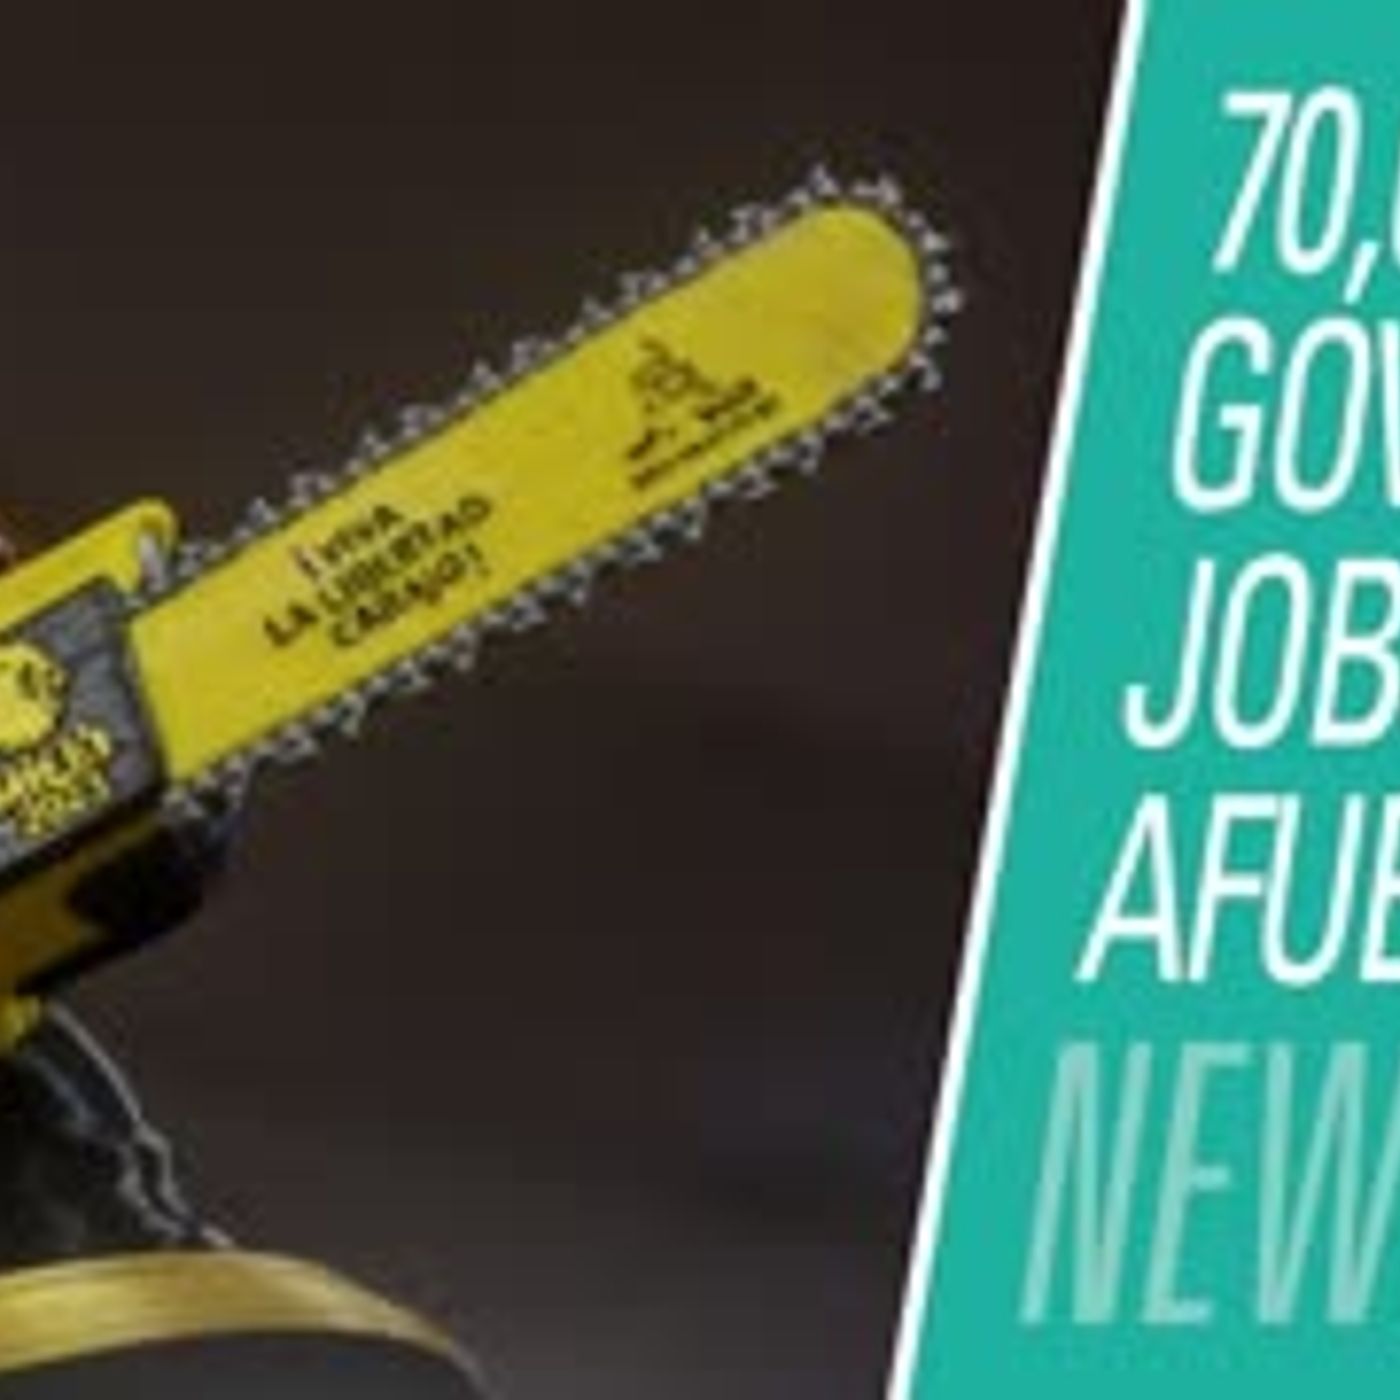 70,000 Government Jobs are AFUERA! Charlotte Proudman Faces Suspension | HBR News 450